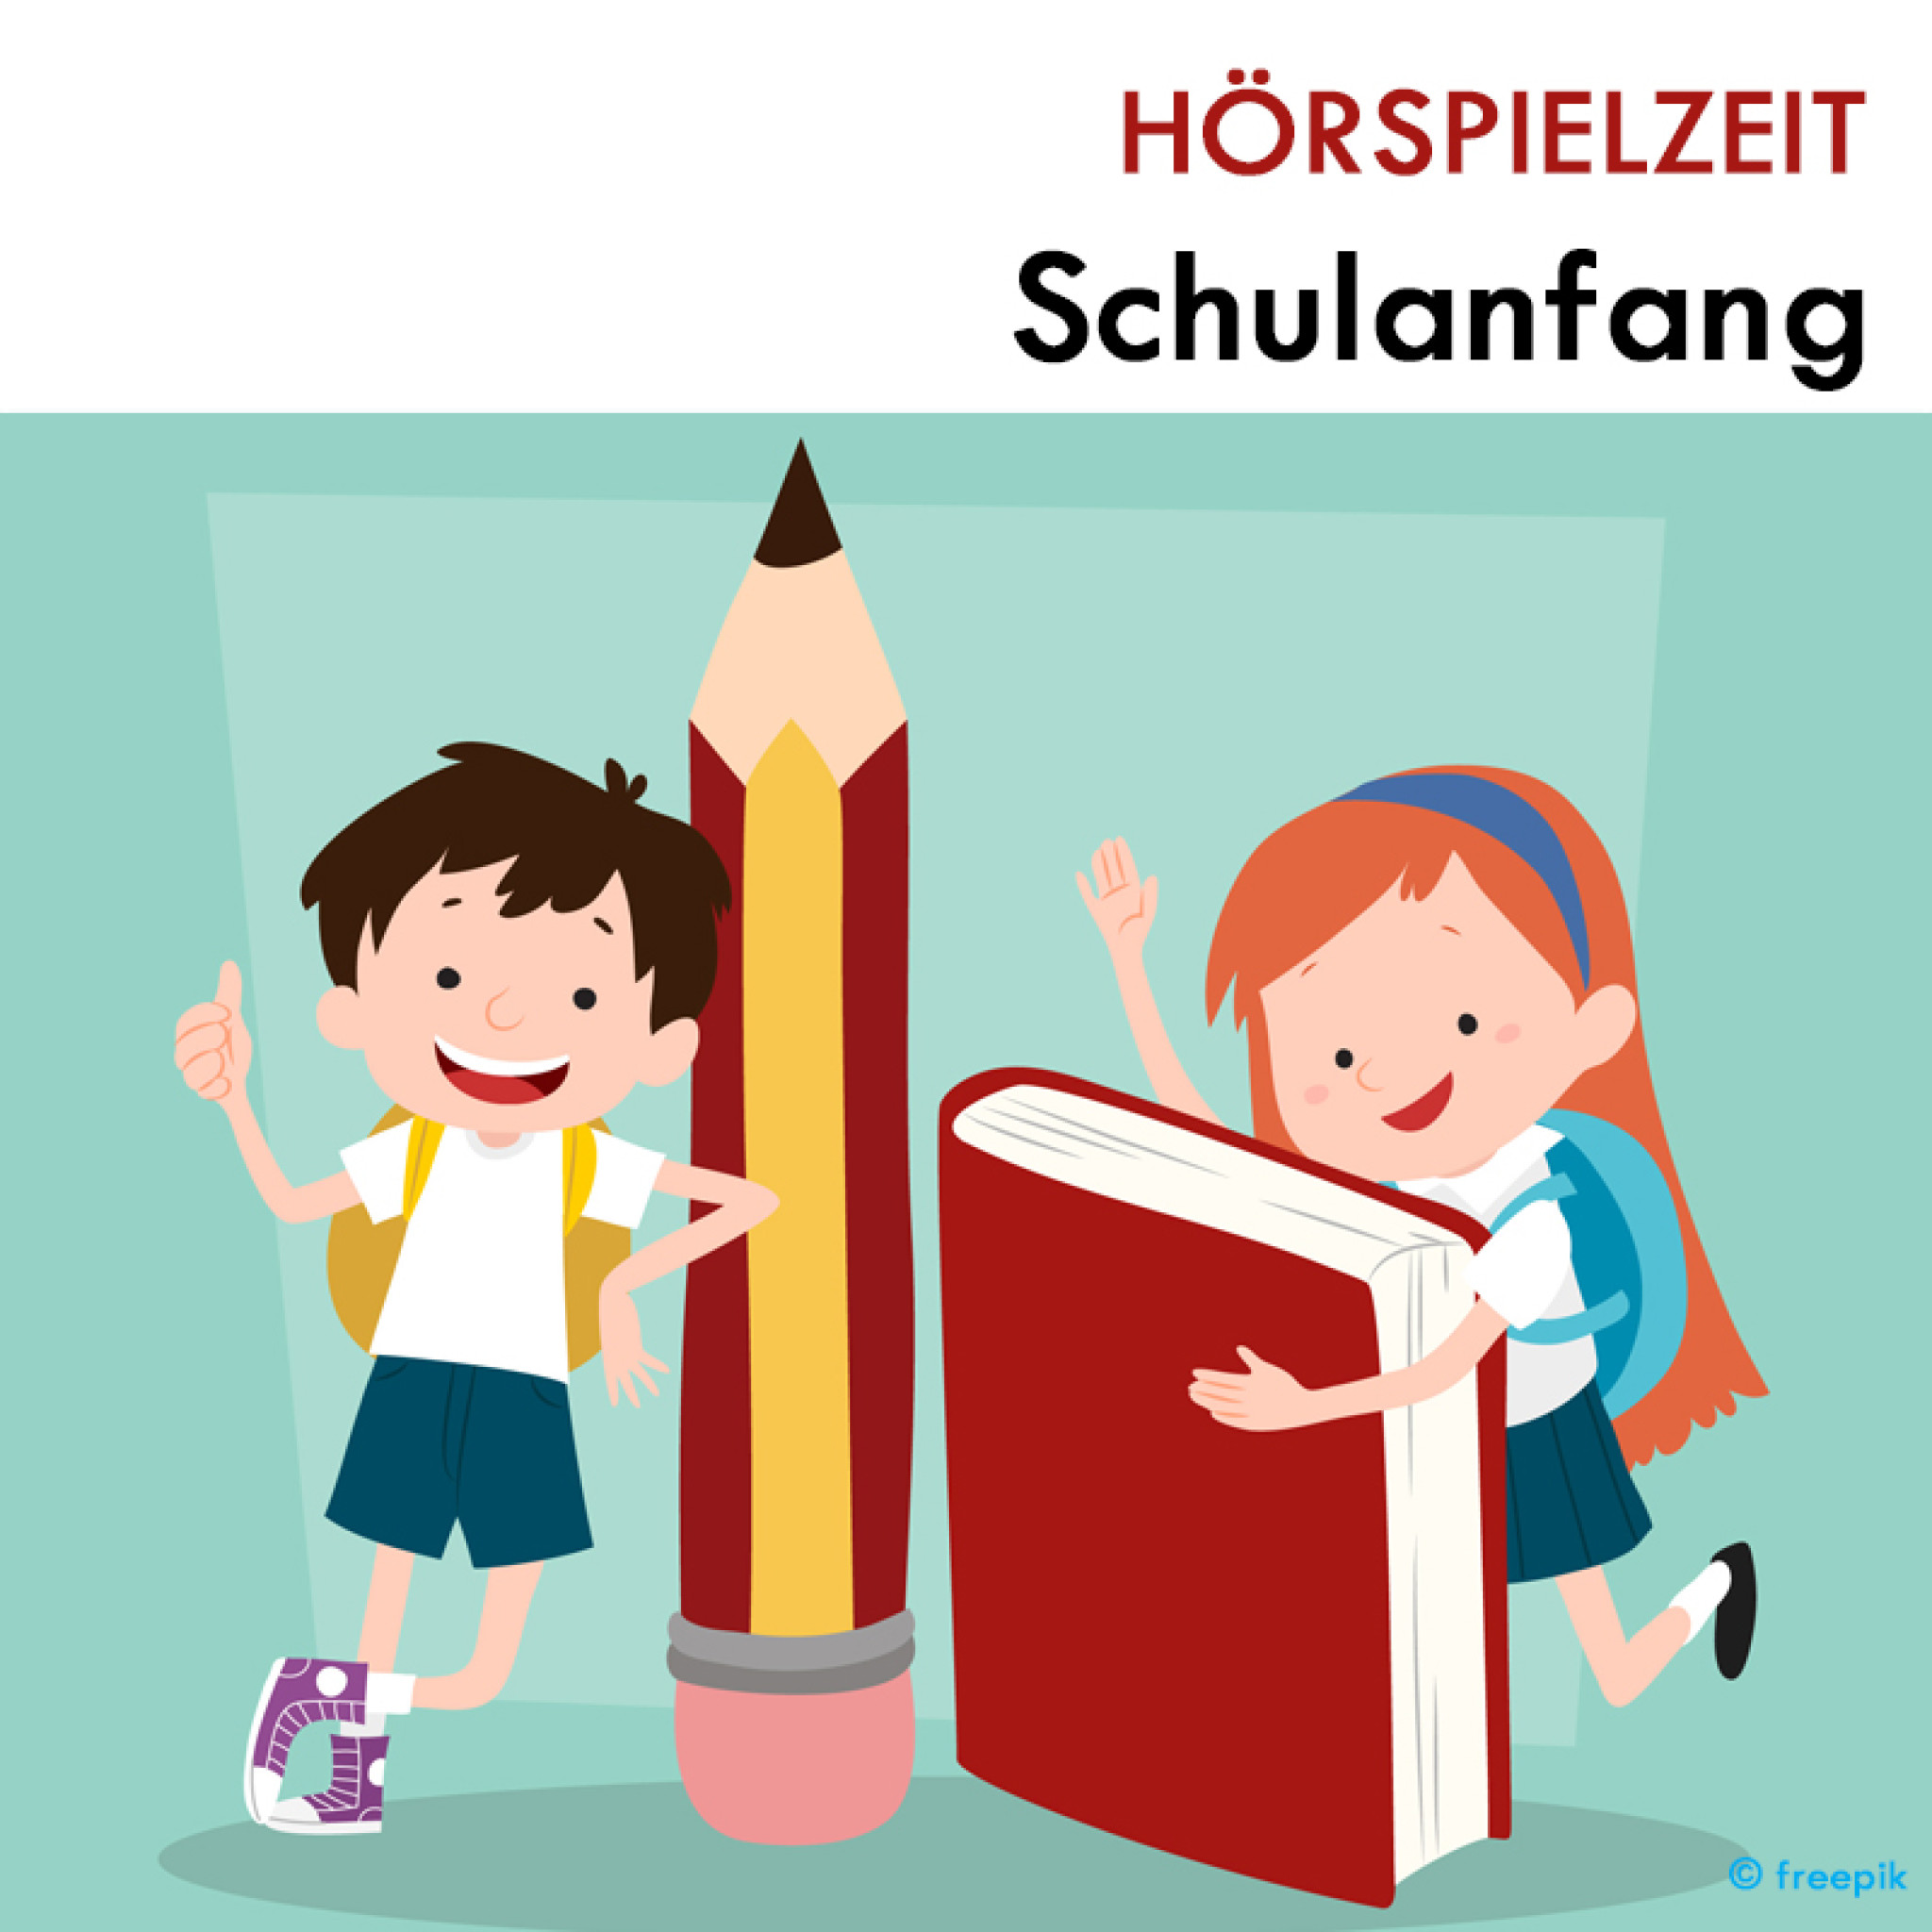 Hörspielzeit Schulanfang (Cover)